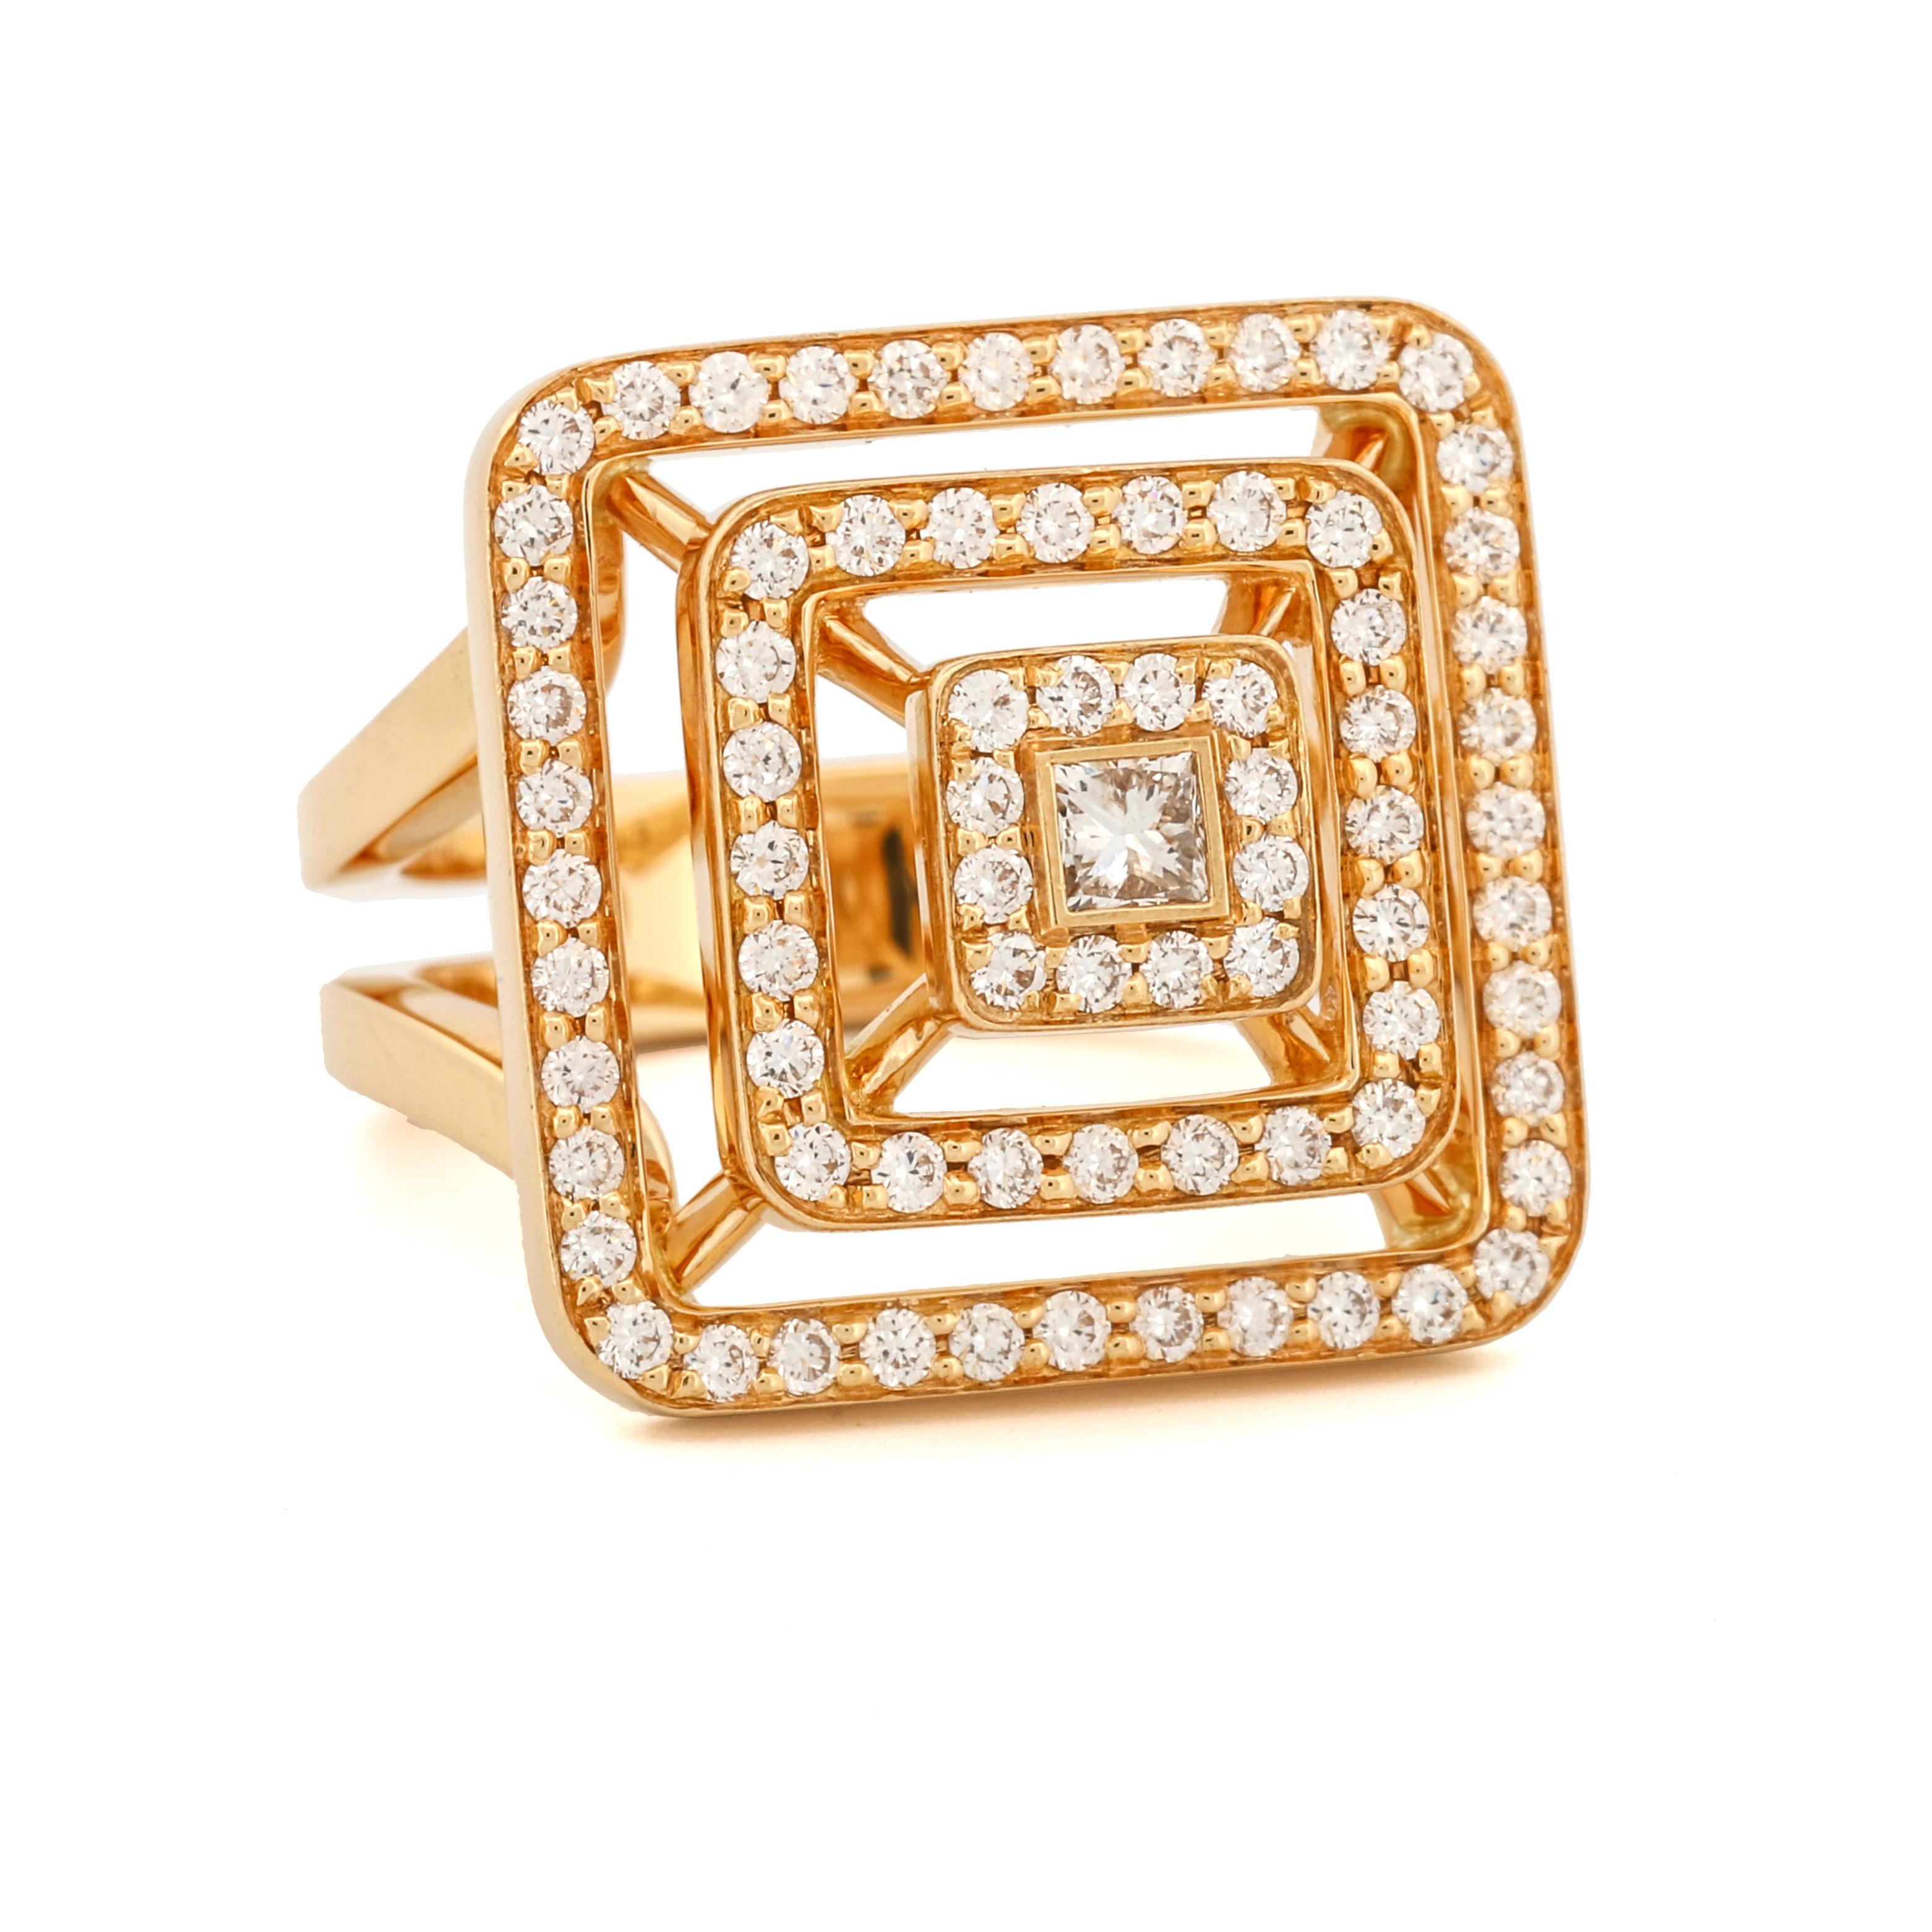 Discover the Piece Pyramid, a captivating three-tiered diamond statement ring meticulously handcrafted in 18-karat gold by renowned designer Mimi So. This extraordinary piece symbolizes life's journey, ascending step by step towards